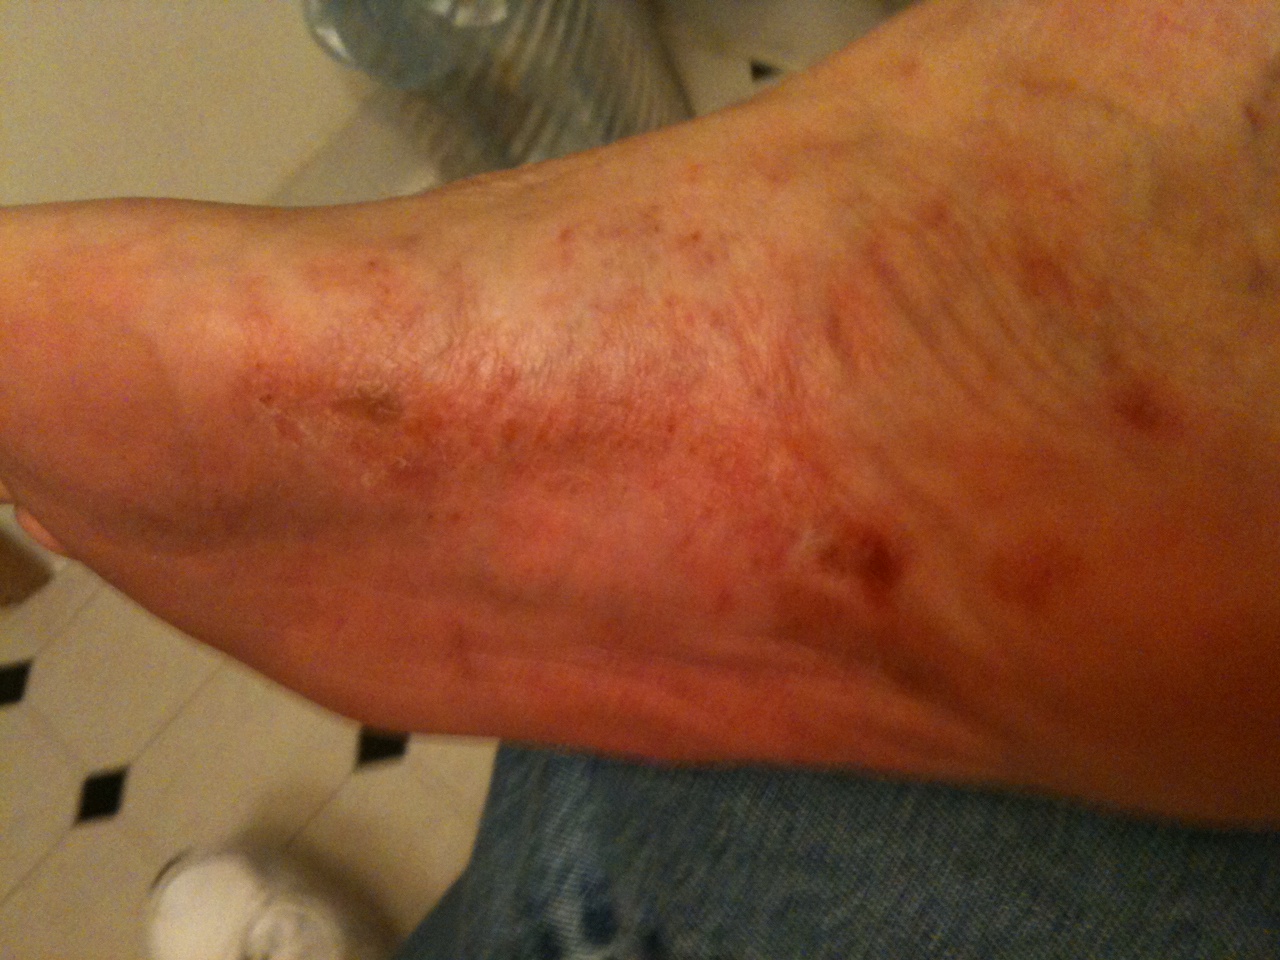 rash on bottom of foot pictures, photos